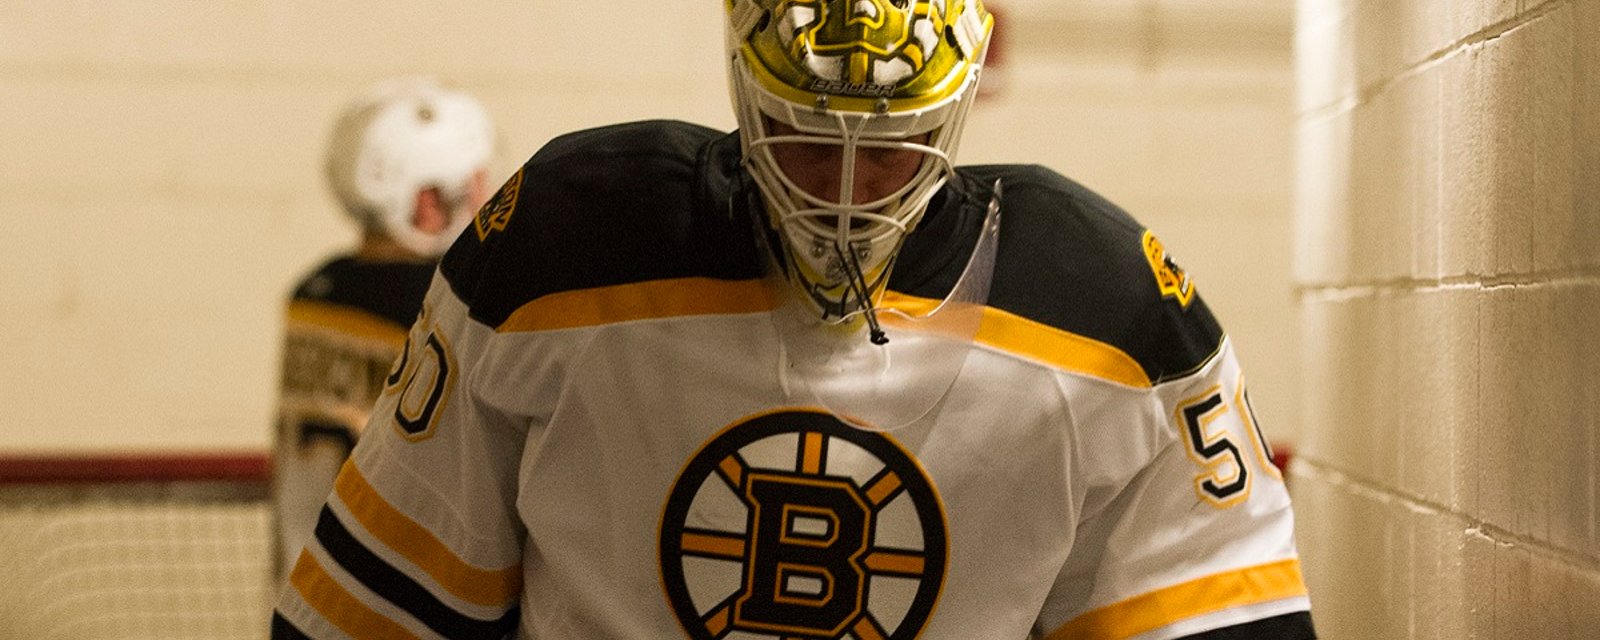 Breaking: Bruins lose yet another goaltender to injury, forced to make emergency replacement. 